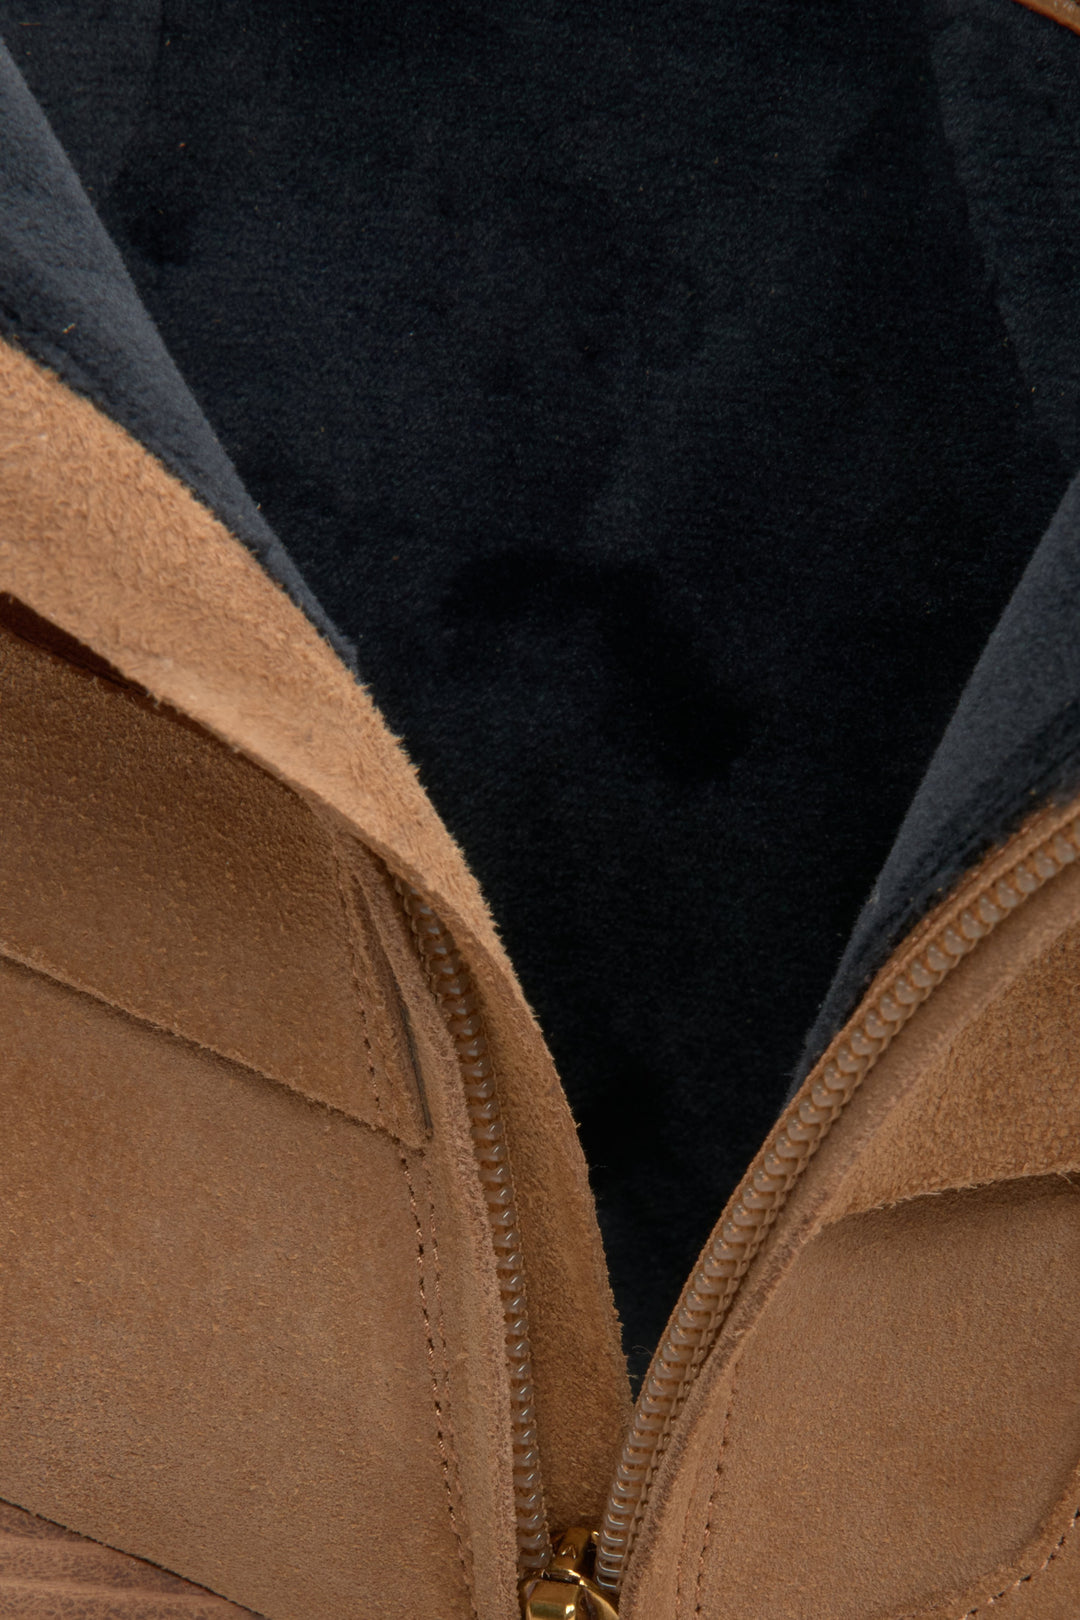 Women's low brown suede cowboy boots by Estro - close-up of the interior of the boot.